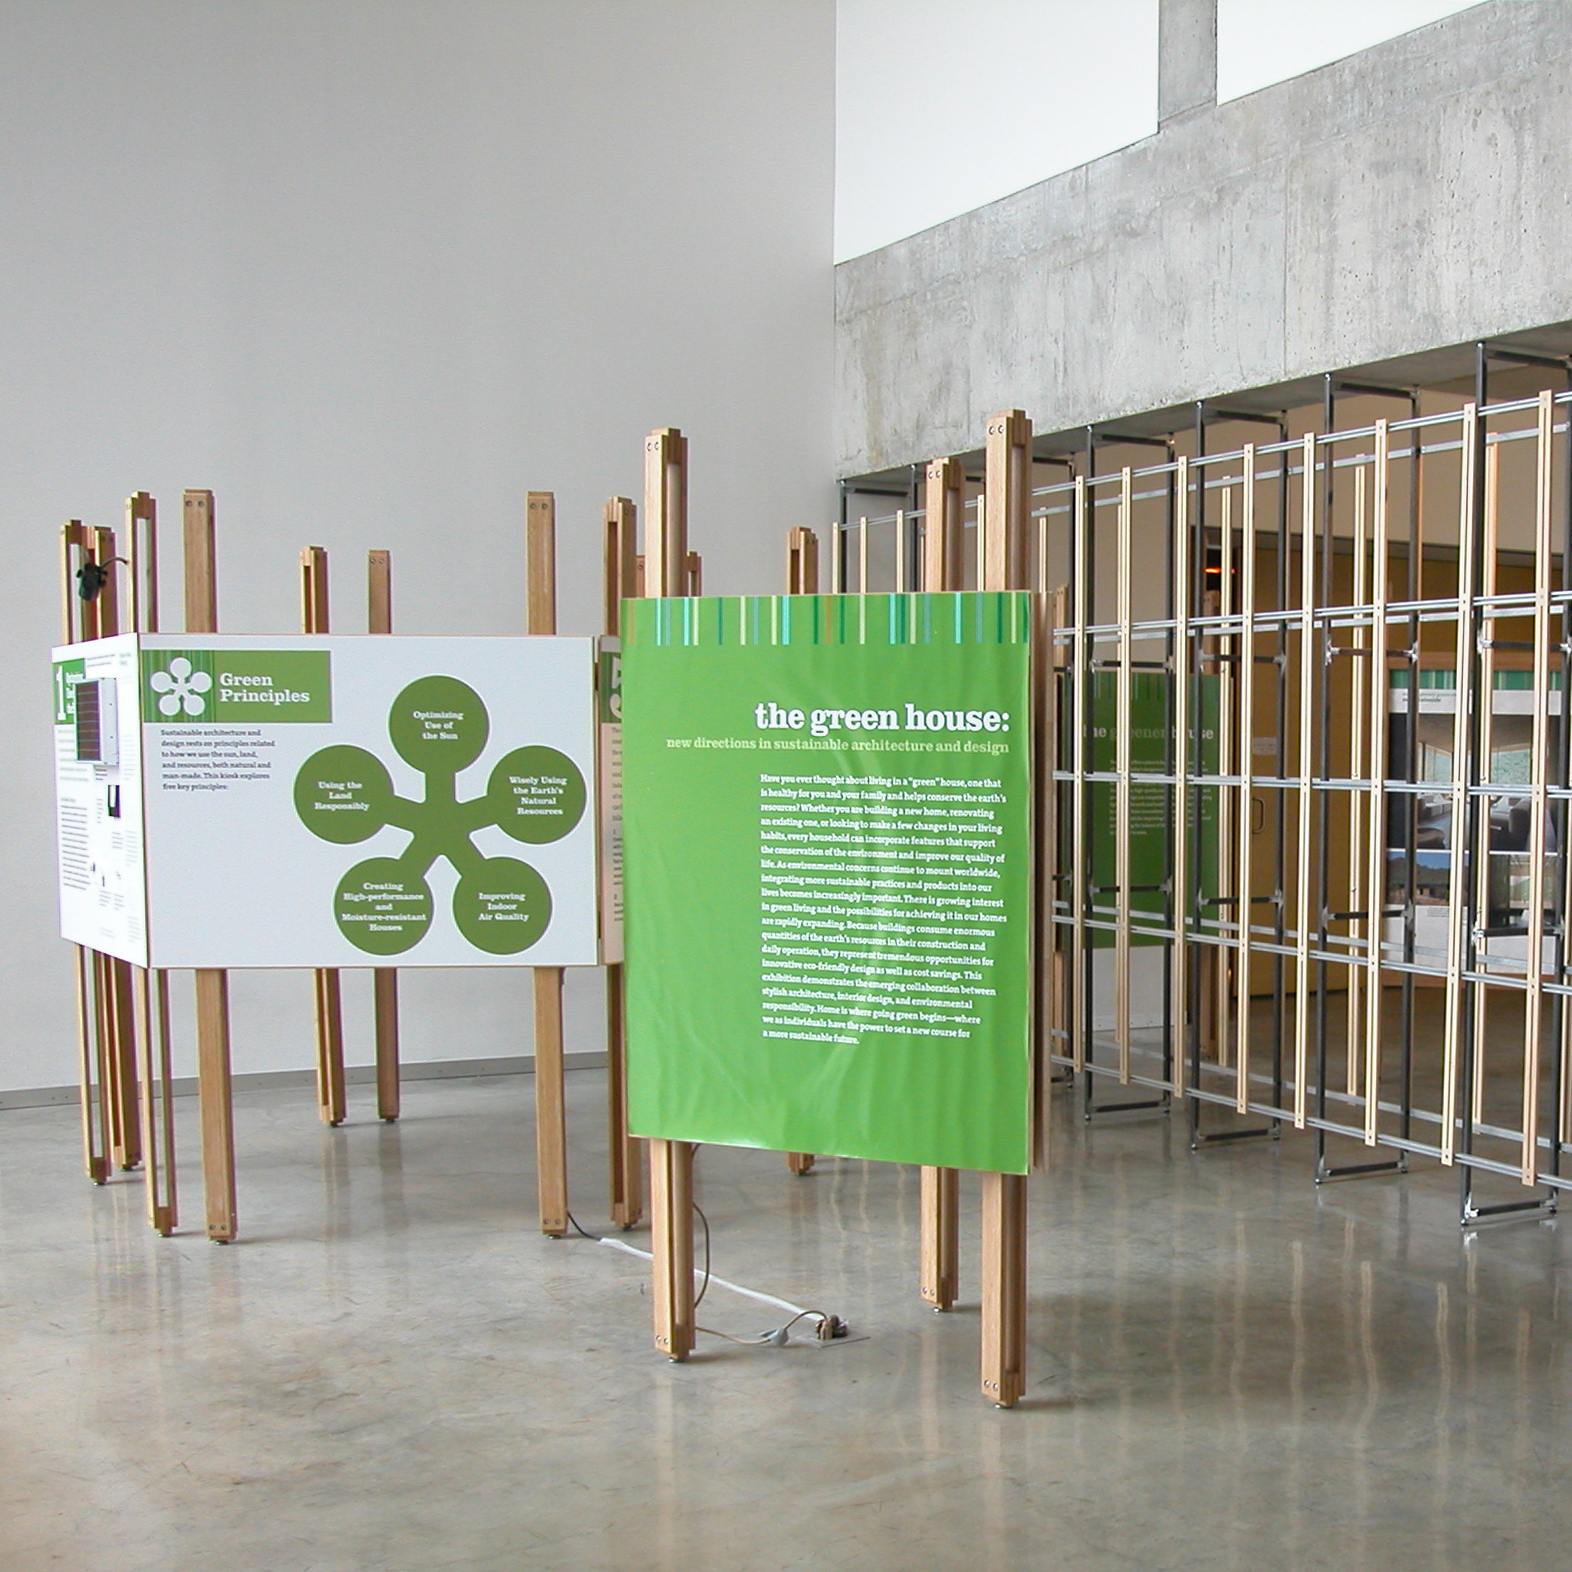 The Green House: New Directions in Sustainable Architecture & Design boards on display in HGA gallery